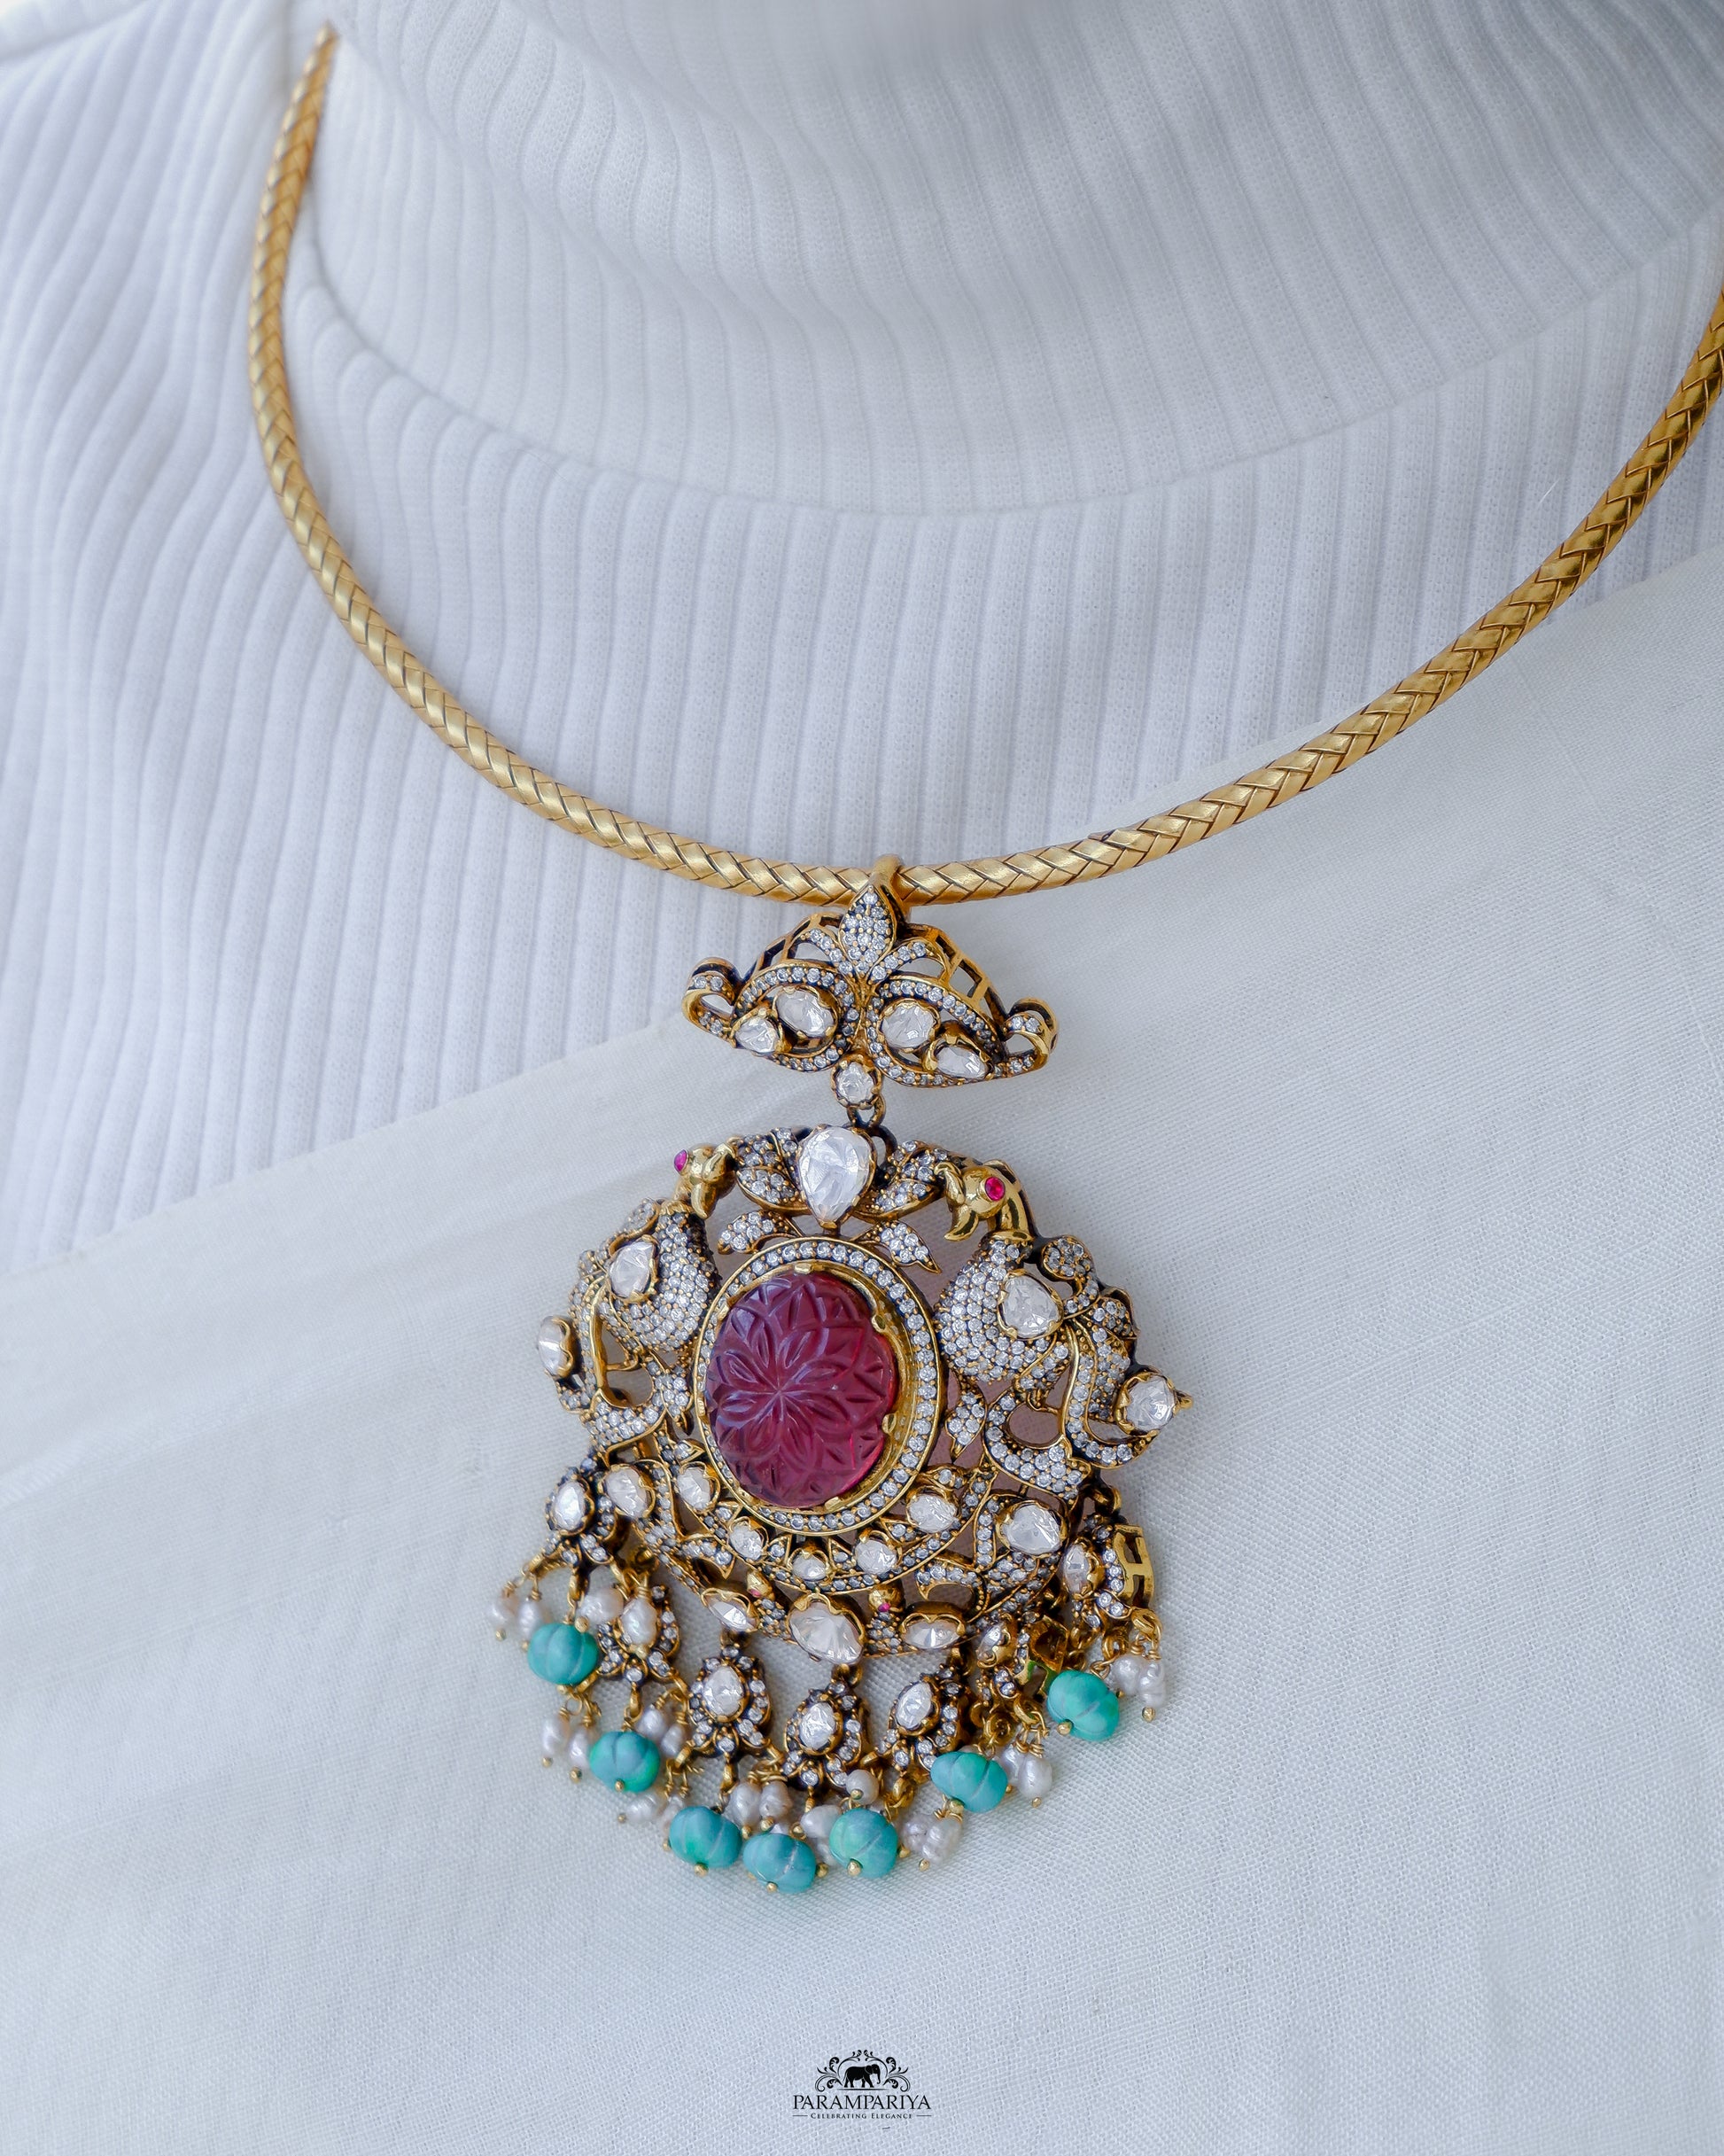 Dazzling hasli necklace with moissanite pendant adorned with turquoise beads made of 92.5 pure silver with micron gold plating is a perfect accessory for cocktail or formal occasions. A timeless piece that adds a touch of elegant sophistication to any ensemble.